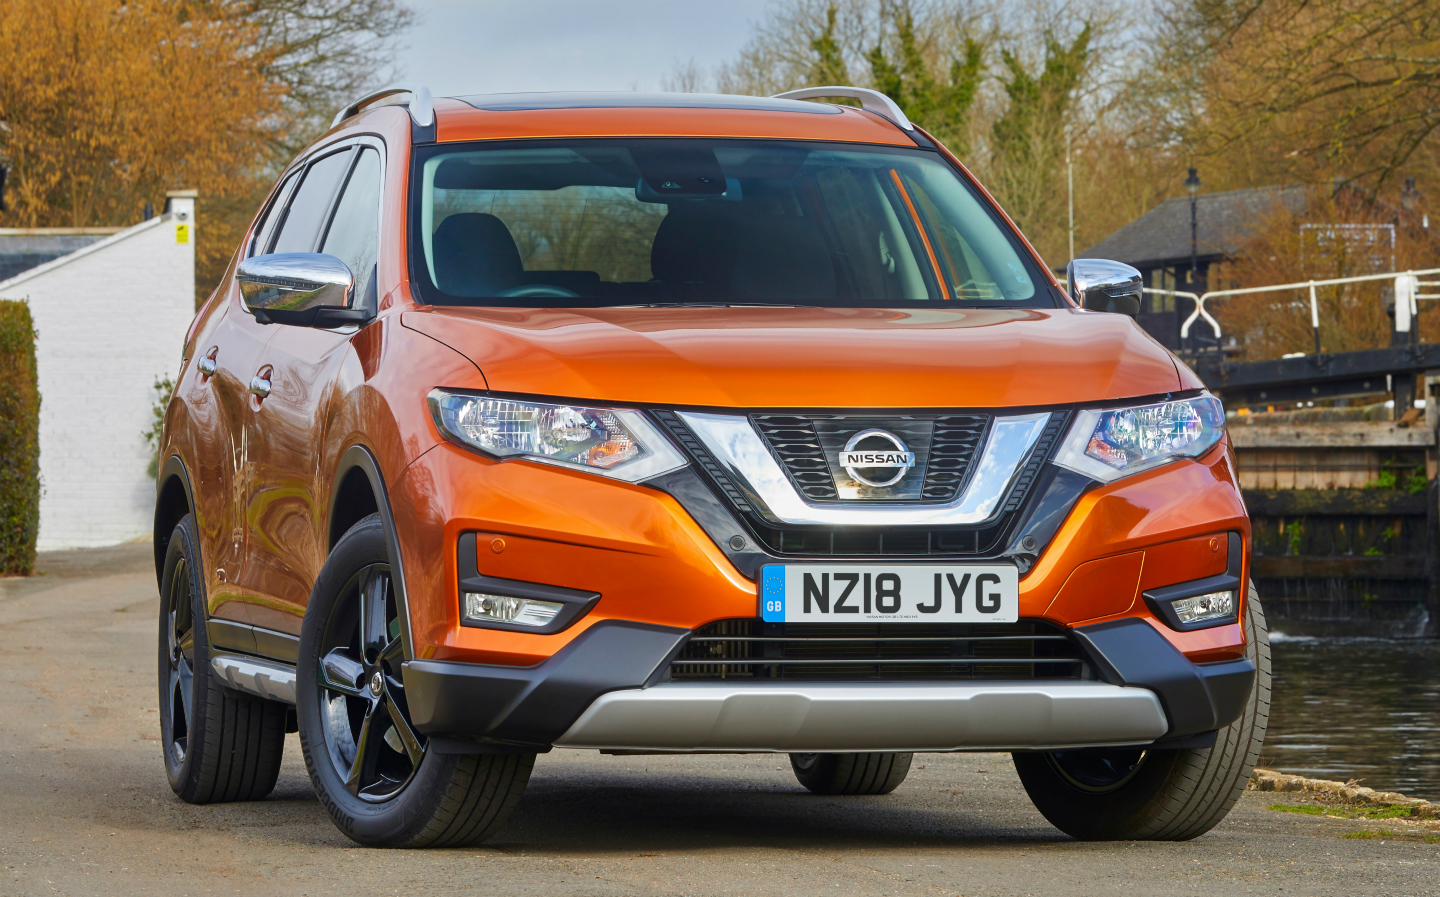 The Sunday Times Motor Awards 2019: Best Dog-Friendly Car of the Year. Nissan X-Trail